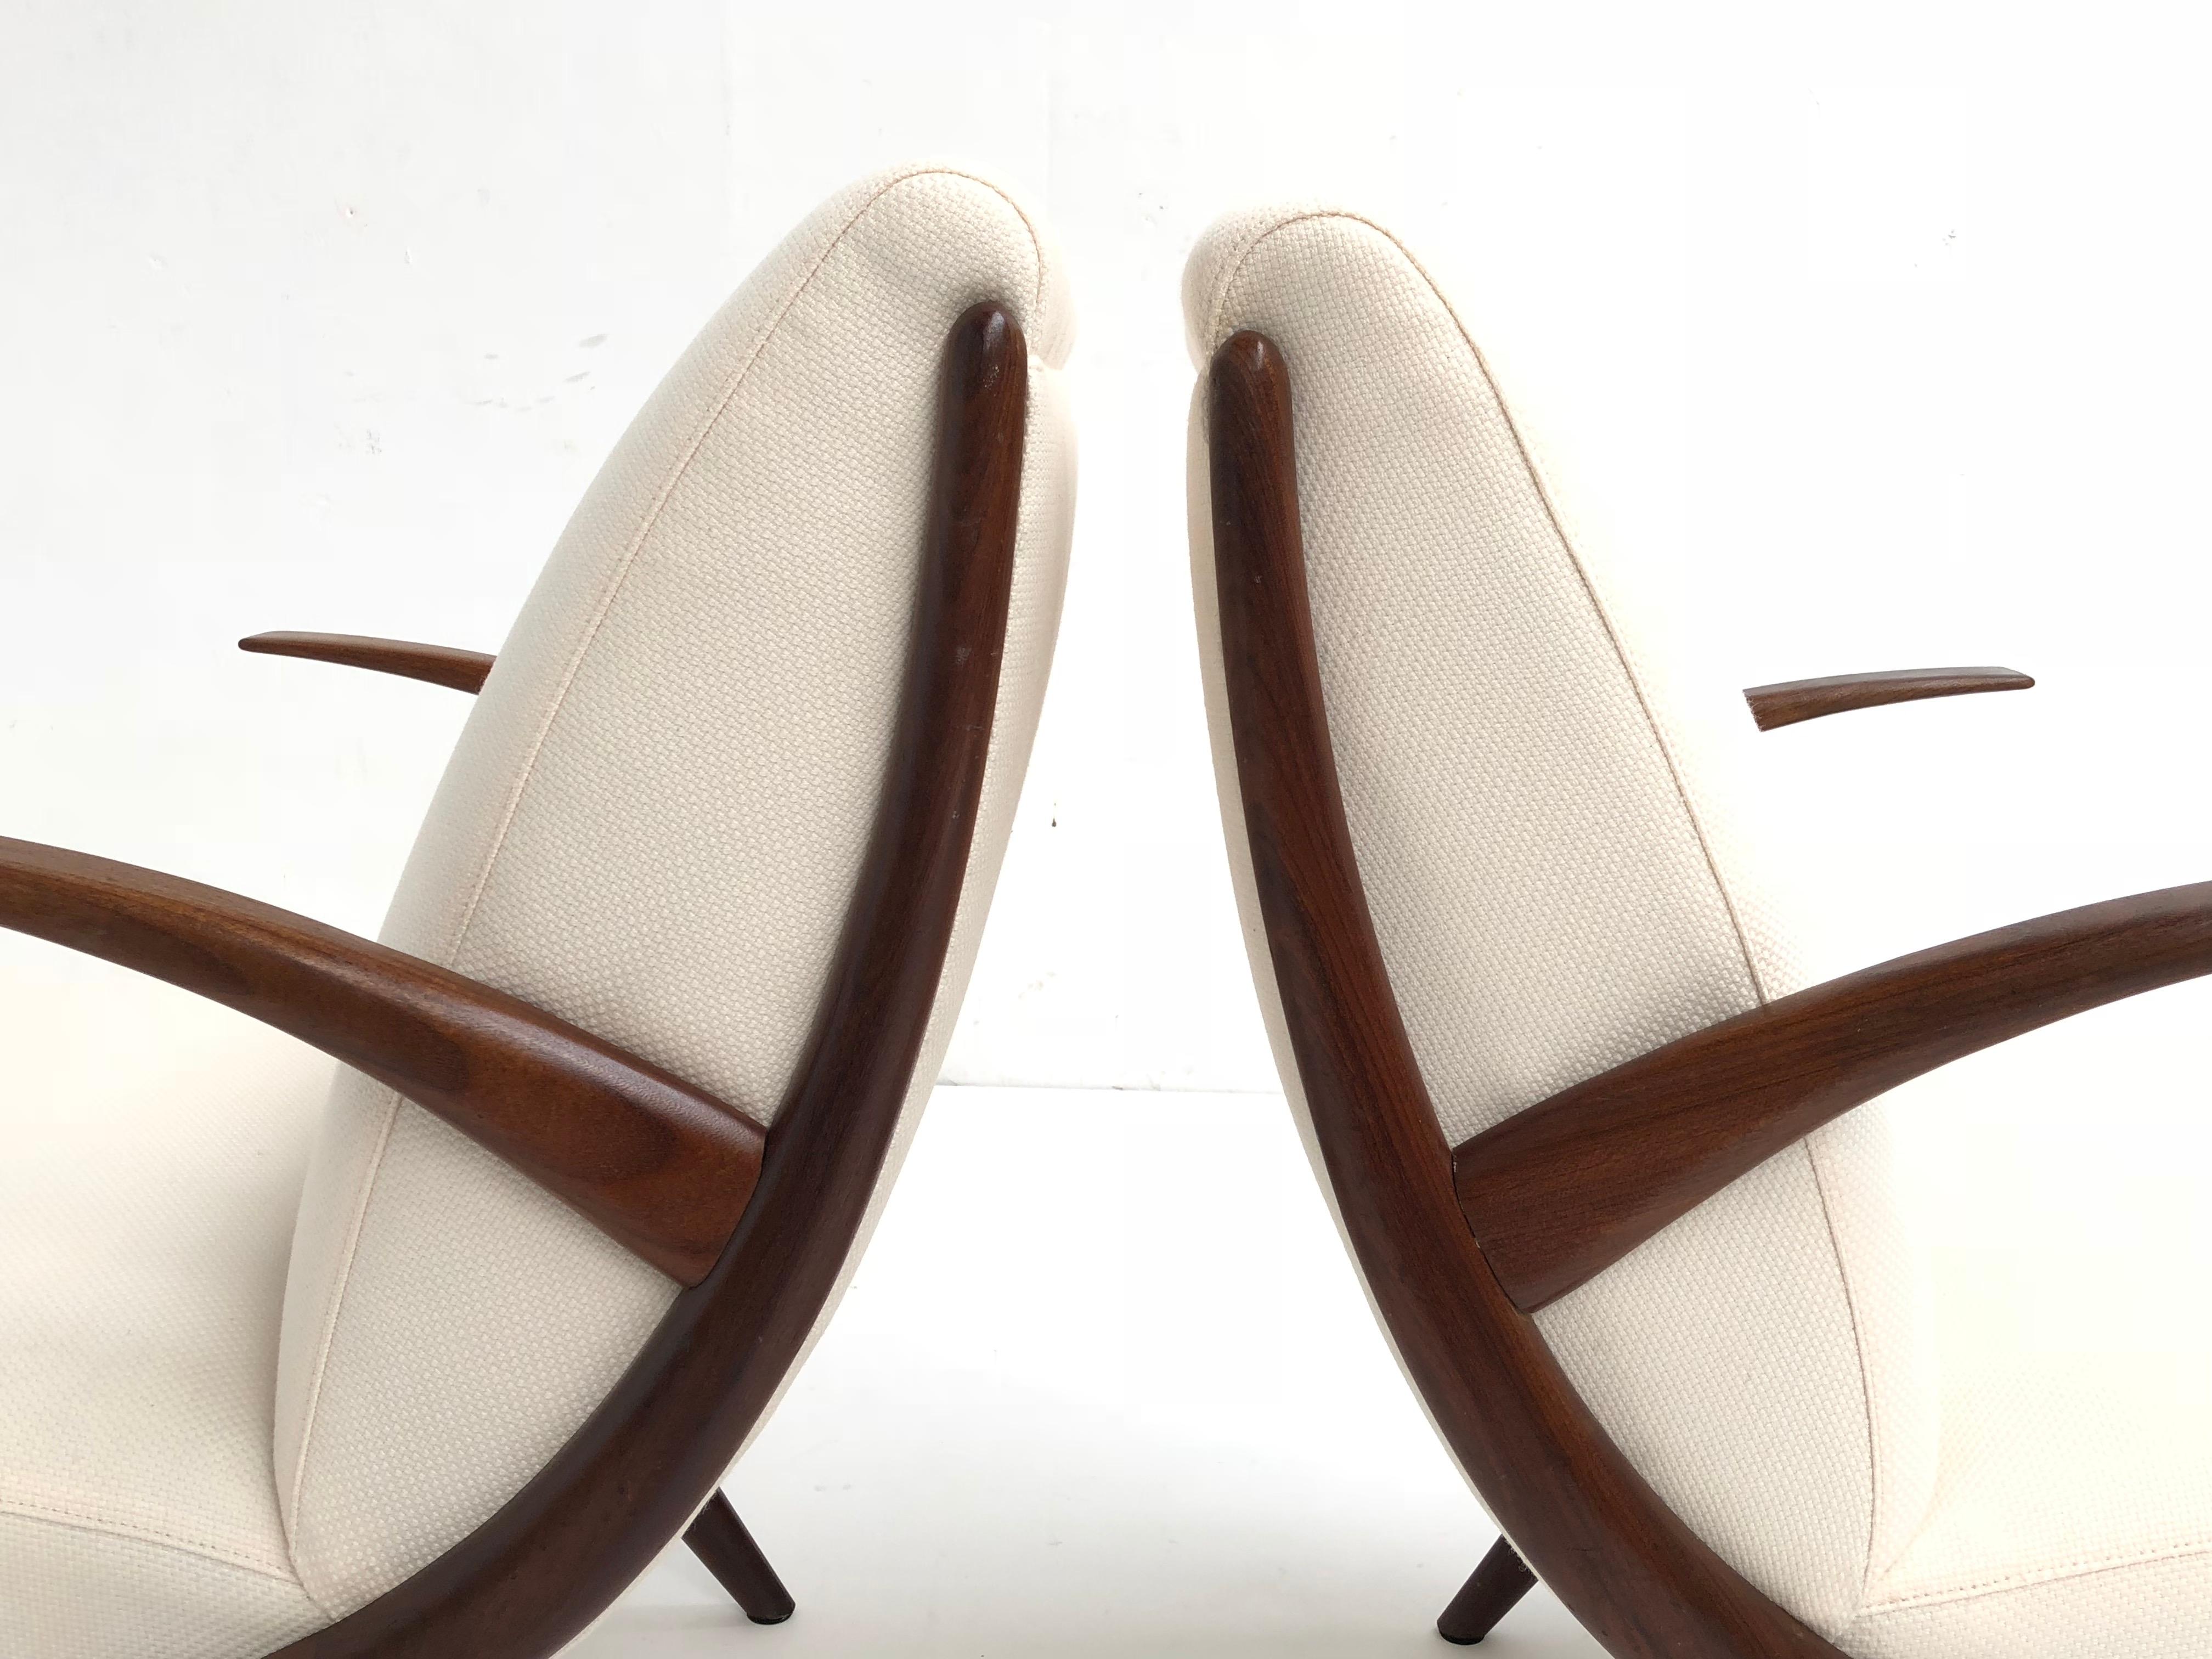 A stunning pair of Scandinavian teak armchairs from the late 1950s
Beautiful organic design in carved solid teak wood
This set has been newly upholstered with new Pantera Foam and a wool and linen De Ploeg fabric
An older restoration to one of